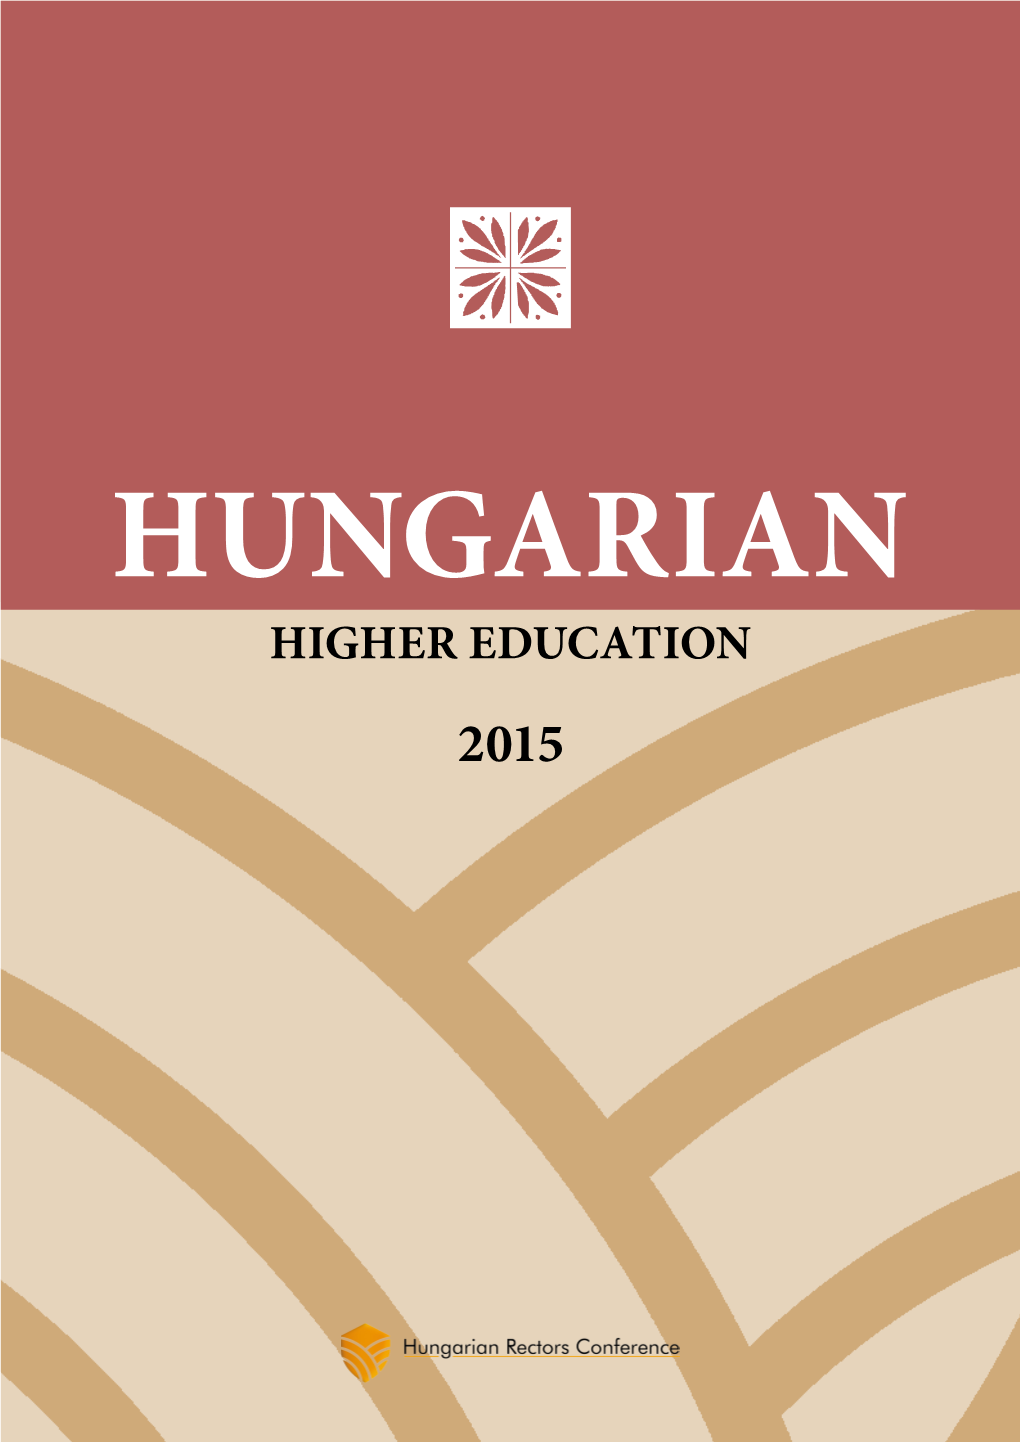 HUNGARIAN HIGHER EDUCATION 2015 2 Introduction Hungarian Higher Education 2015 Dr